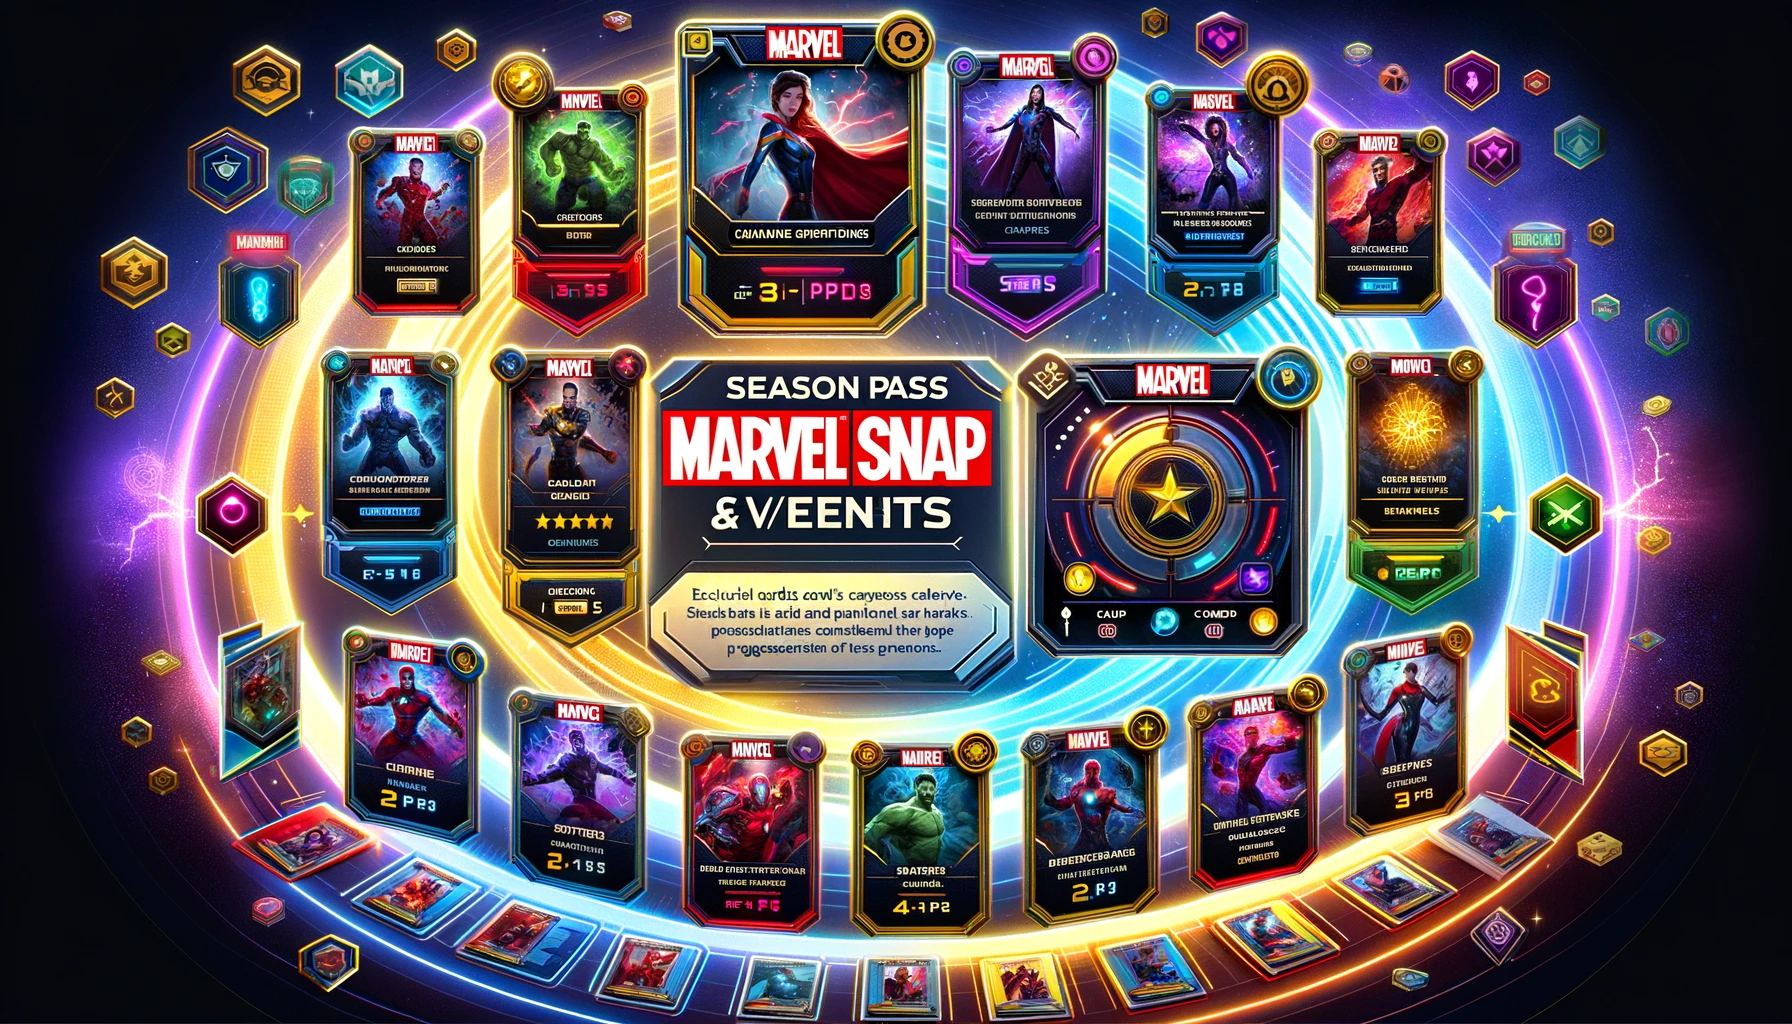 A wide-format image depicting Marvel Snap's Season Pass and events. Colorful Marvel cards glow with power, surrounded by visual elements symbolizing rewards, challenges, and events. Superheroes and villains feature prominently, while indicators for credits, gold, and variants highlight card progression.